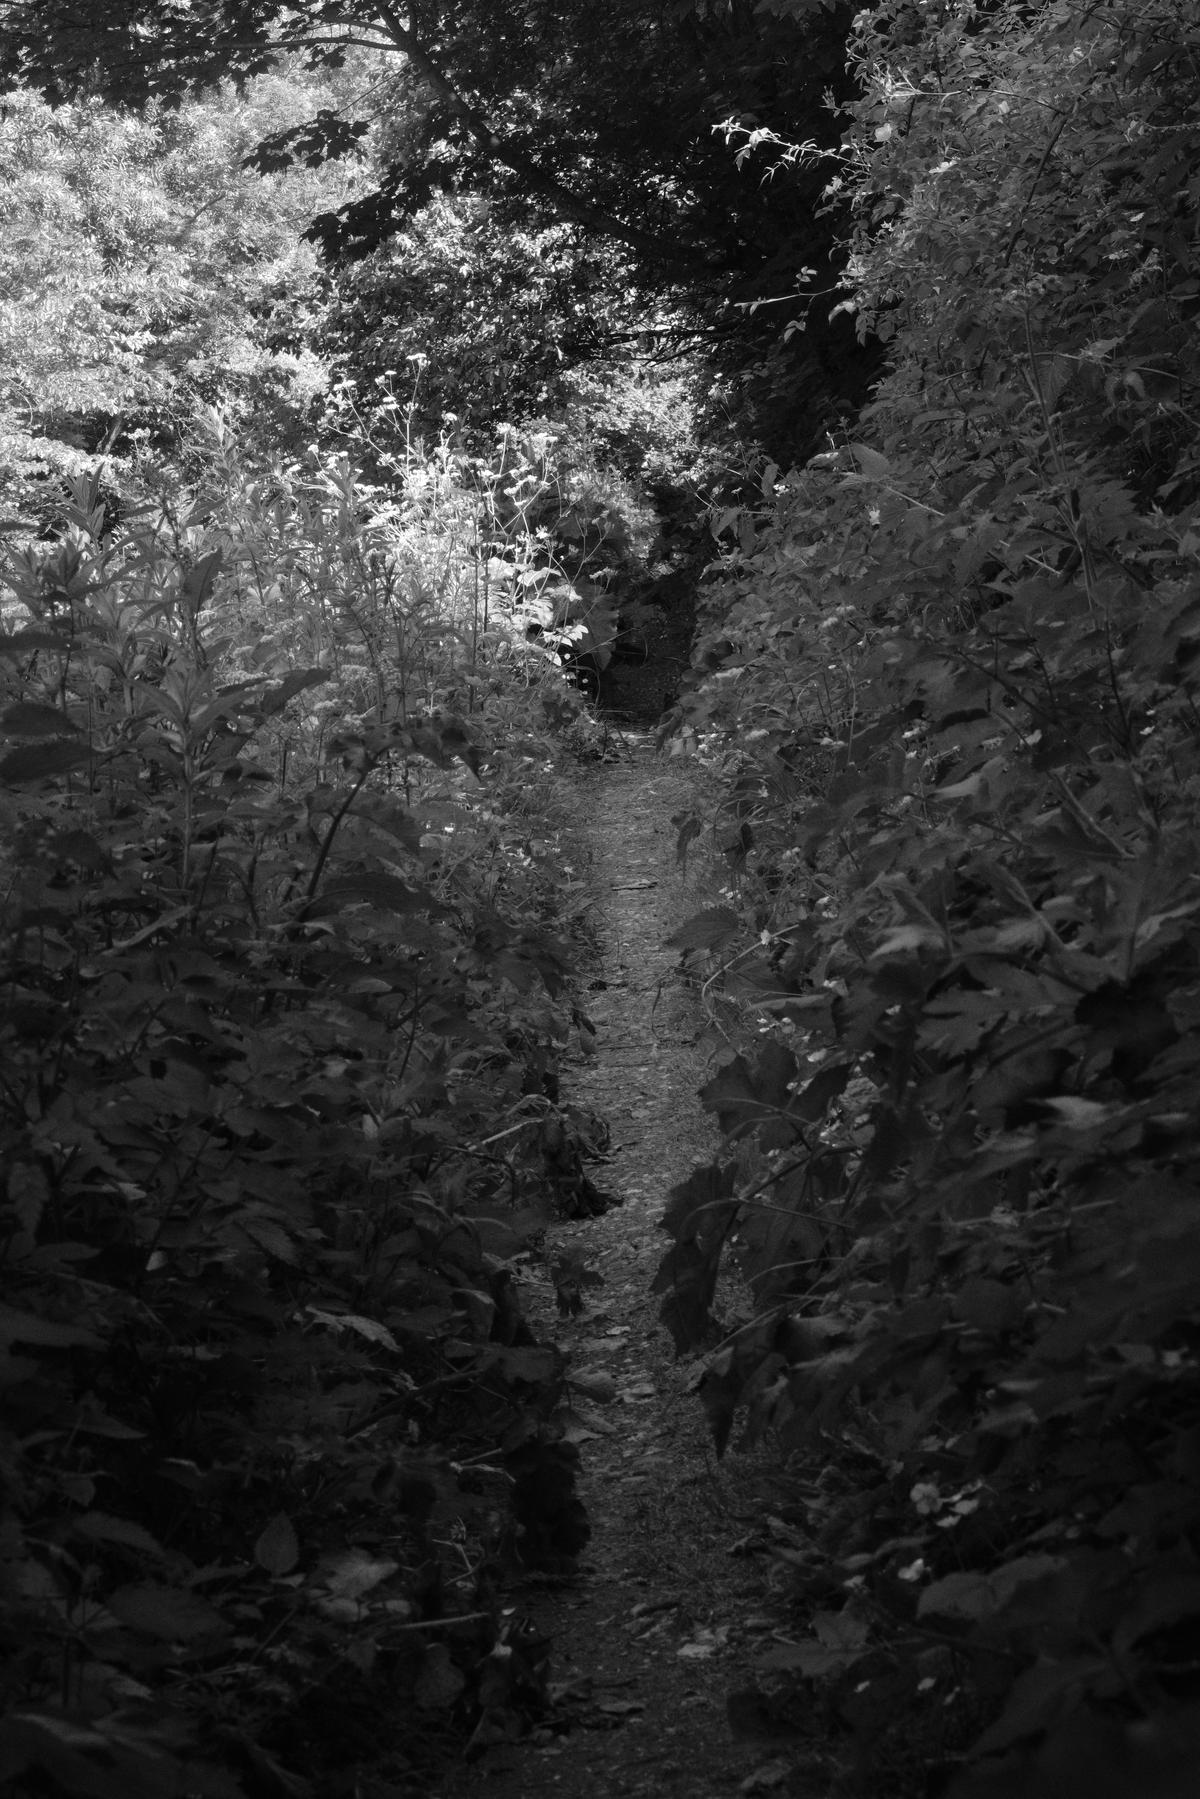 The way ahead, overgrown and in black and white